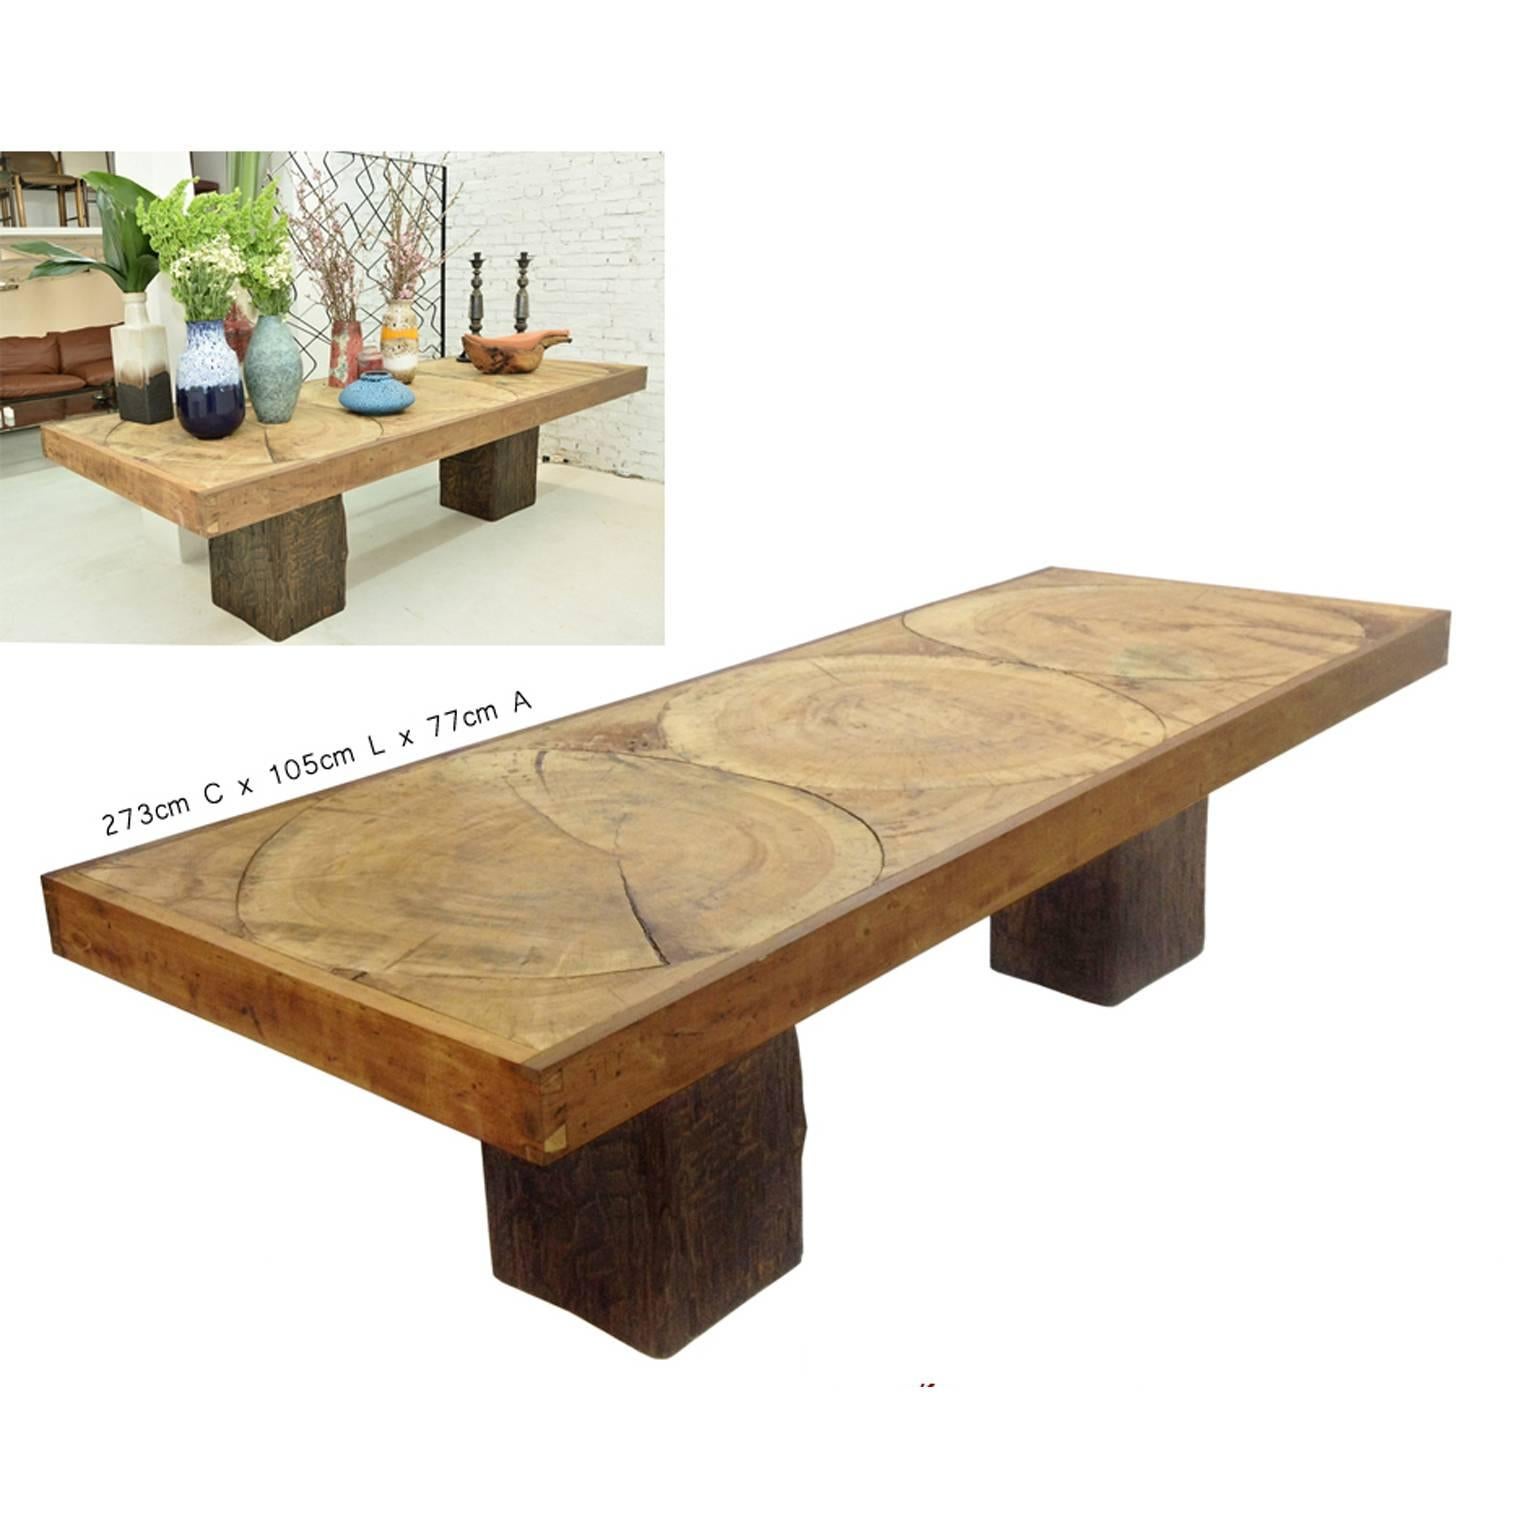 Dining table made of Brazilian hardwood by Jose Zanine Caldas, 1973
Provenance: from a Zanines' house project in Joatinga neighborhood, Rio de Janeiro

Zanine is one of the few designers who produced furniture in several schools of thought. His